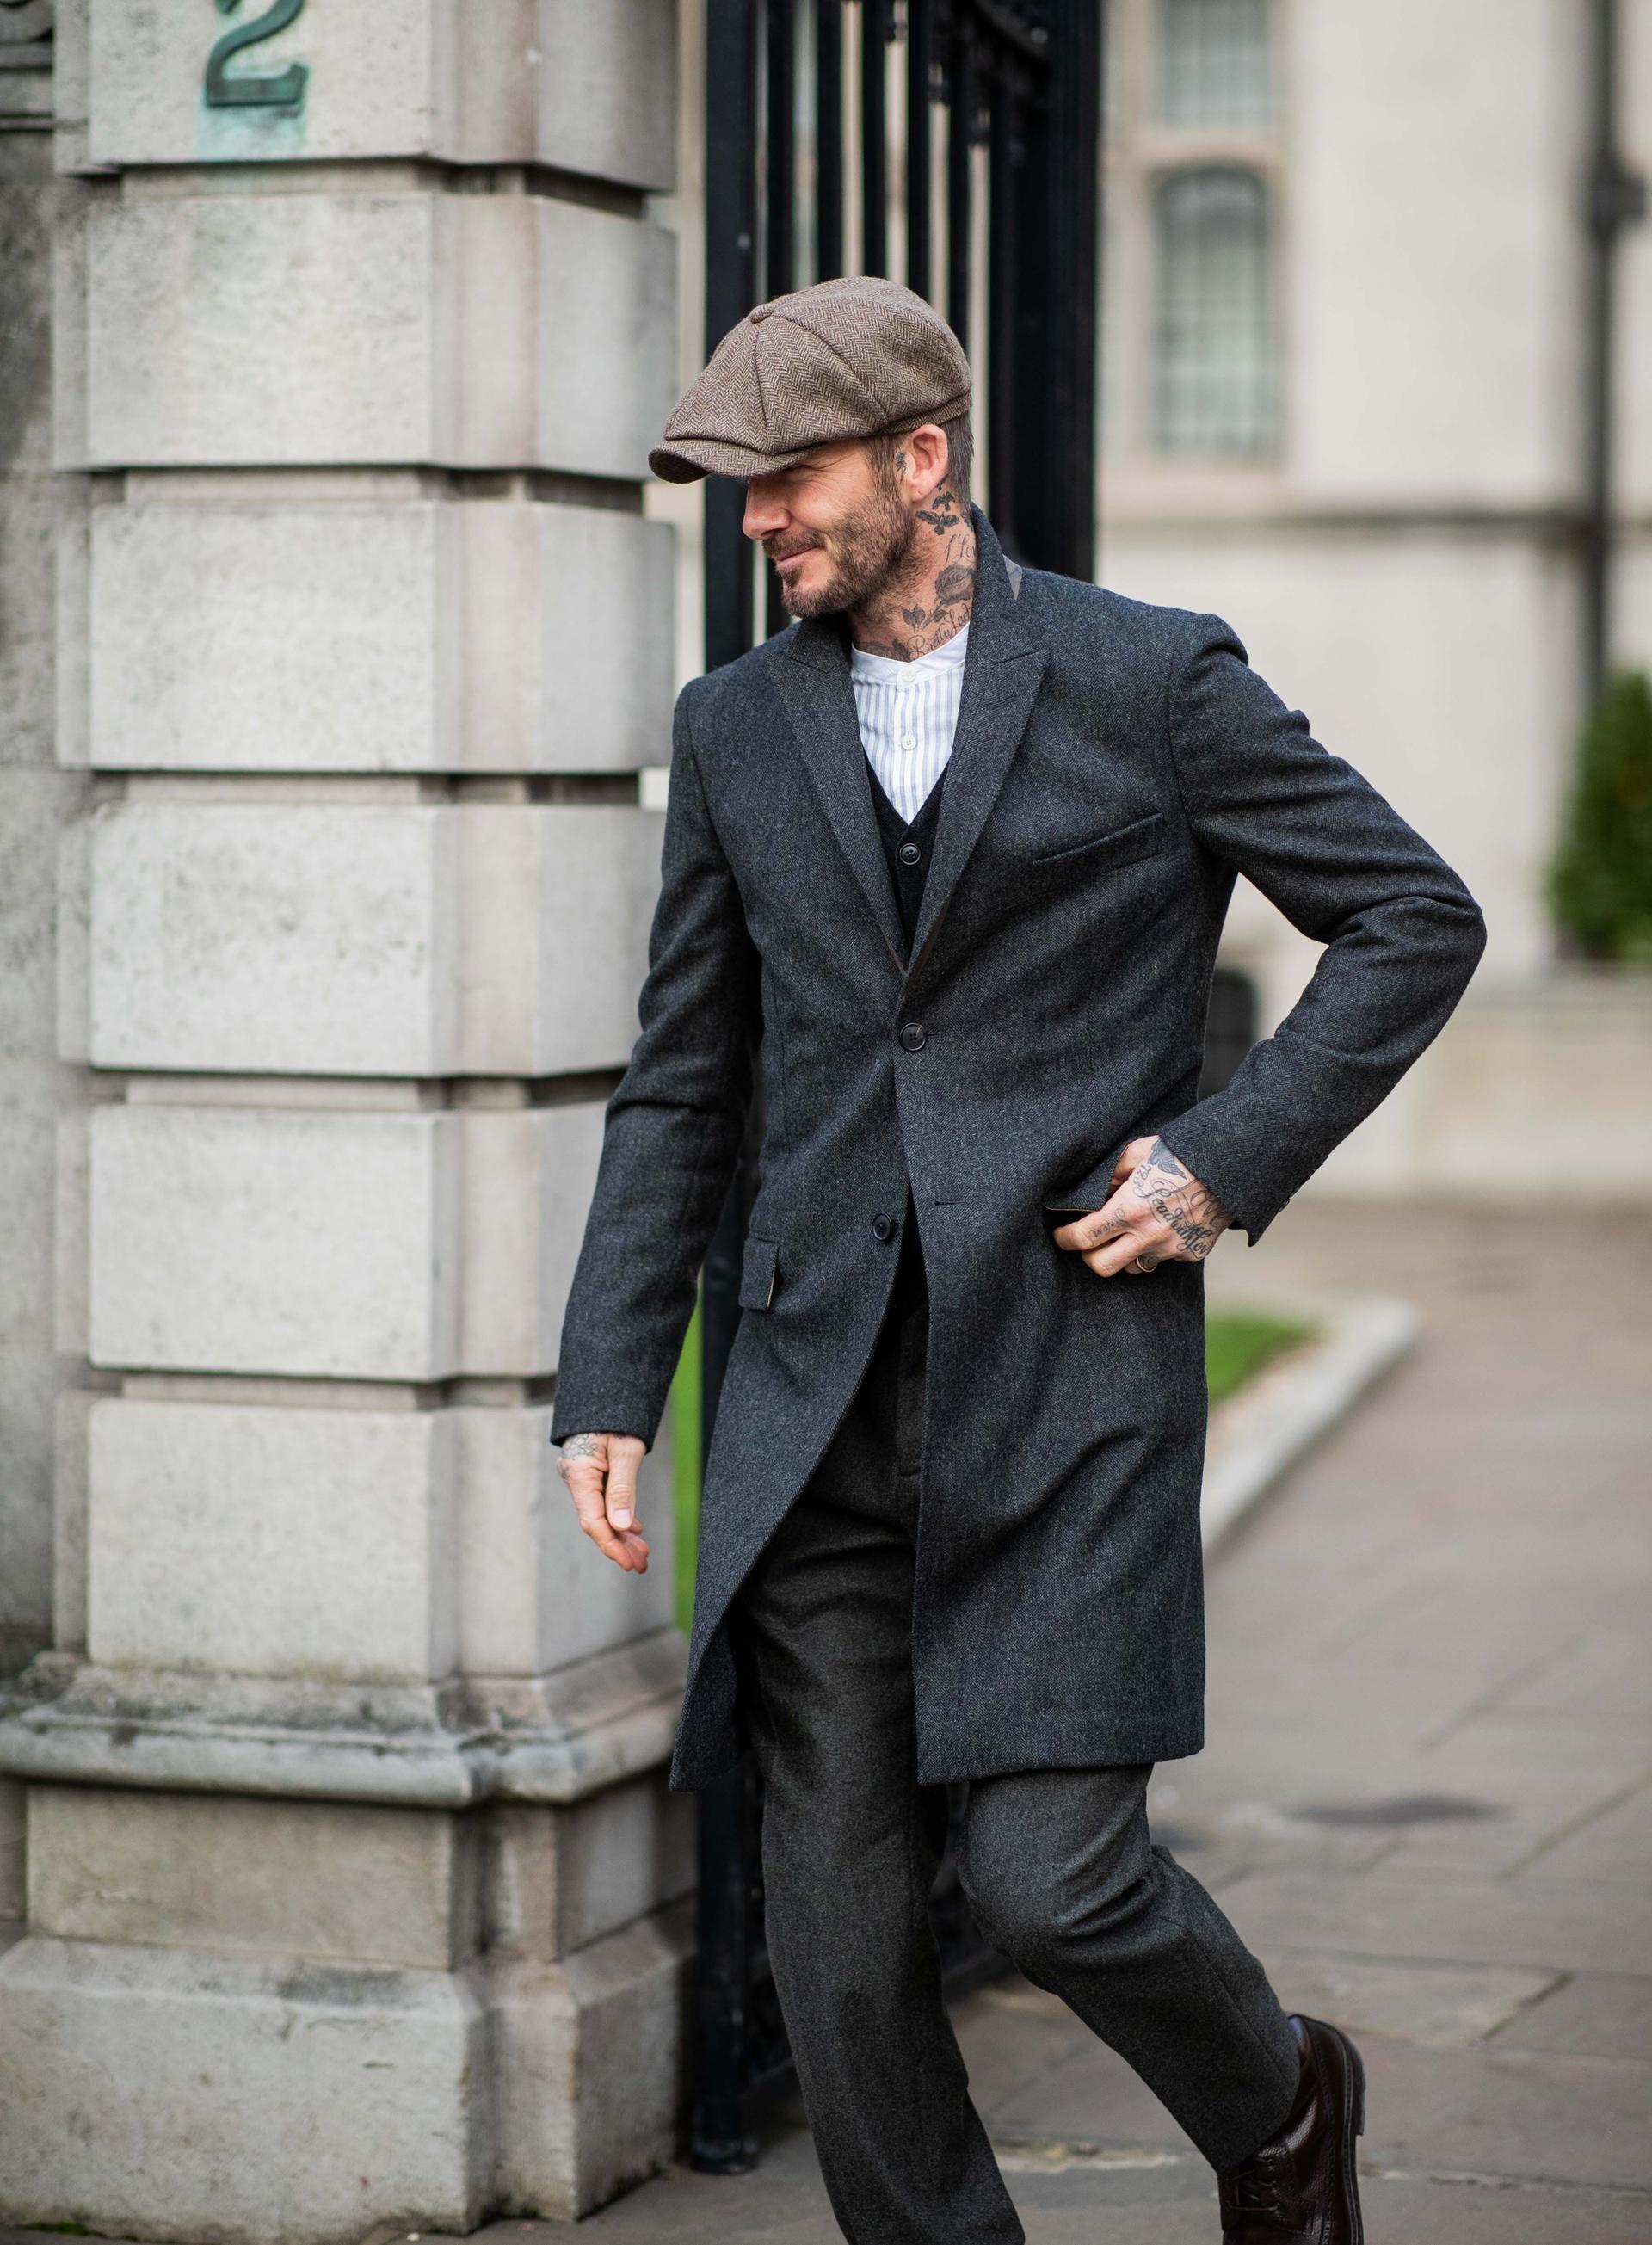 Head to head: A history of the flat cap throughout fashion